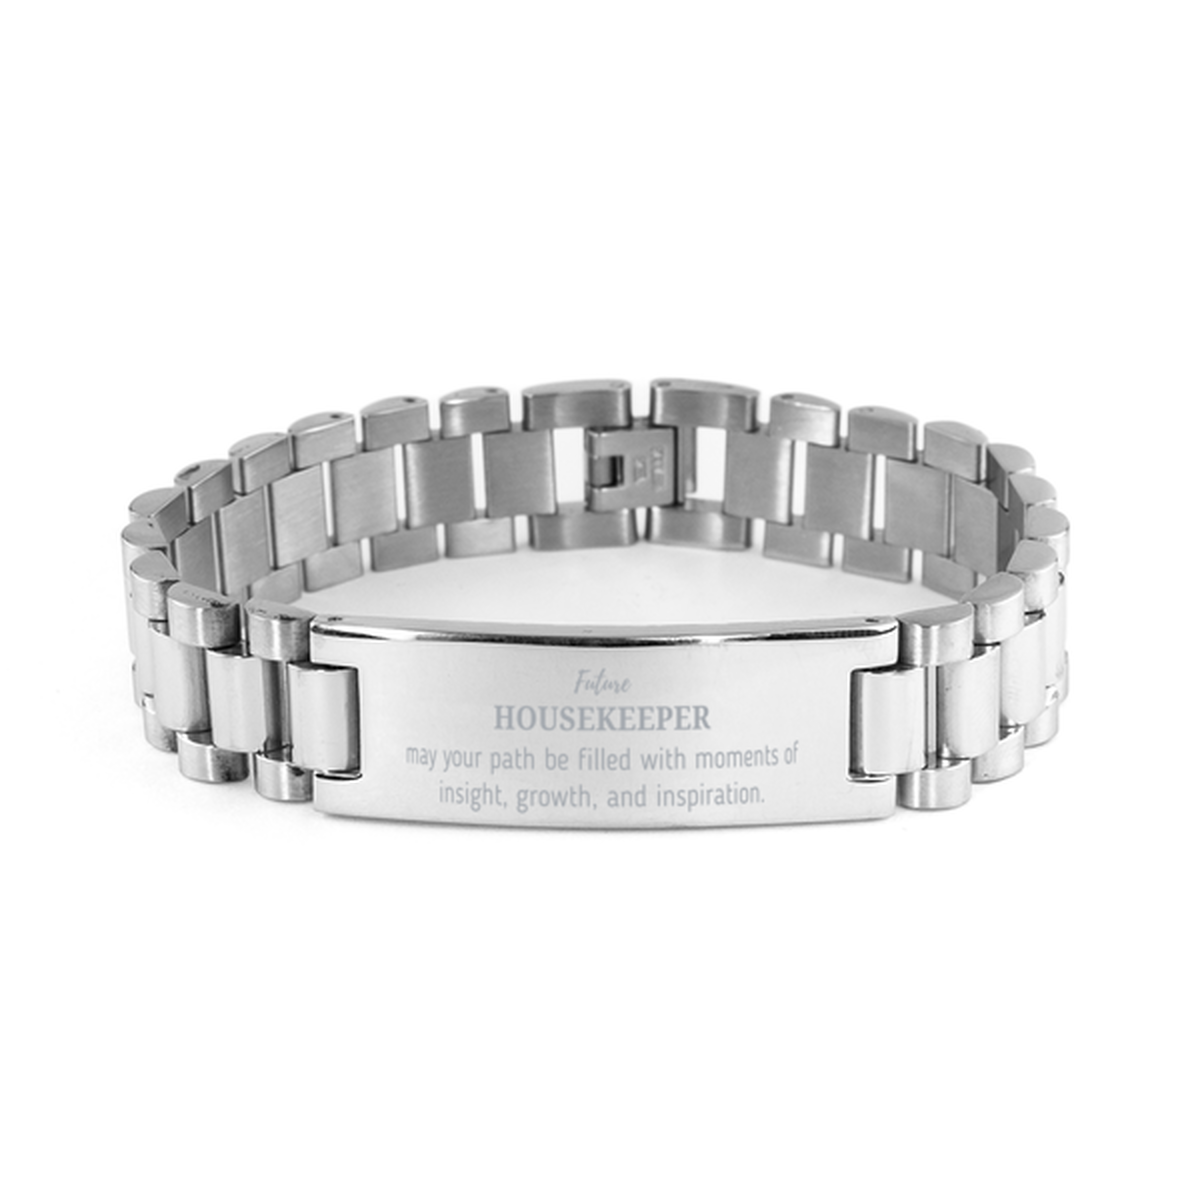 Future Housekeeper Gifts, May your path be filled with moments of insight, Graduation Gifts for New Housekeeper, Christmas Unique Ladder Stainless Steel Bracelet For Men, Women, Friends